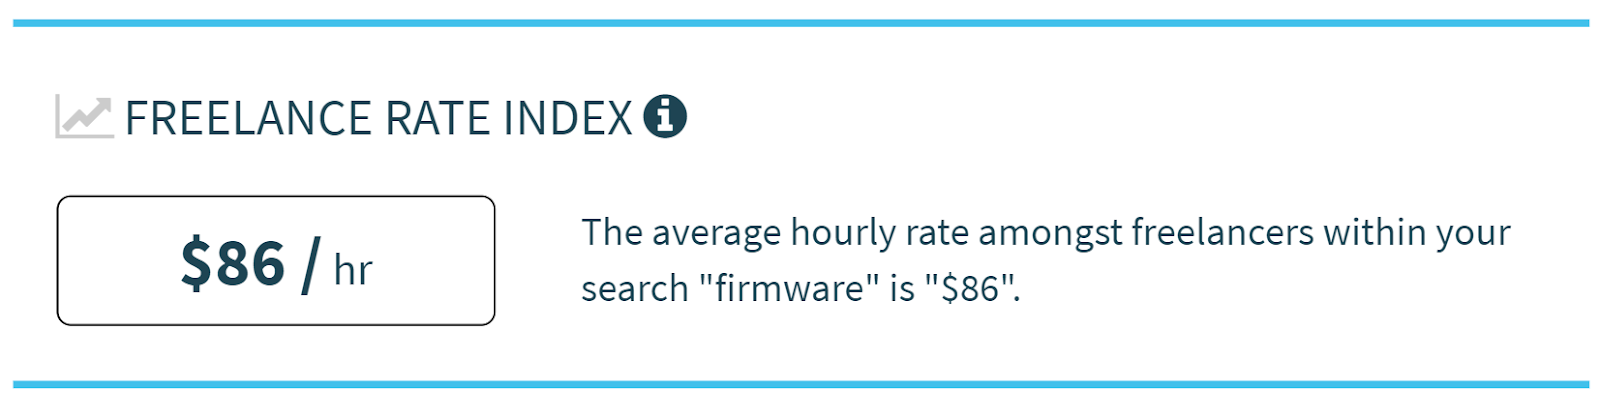 Average Hourly Rate Of Freelance Firmware Engineers